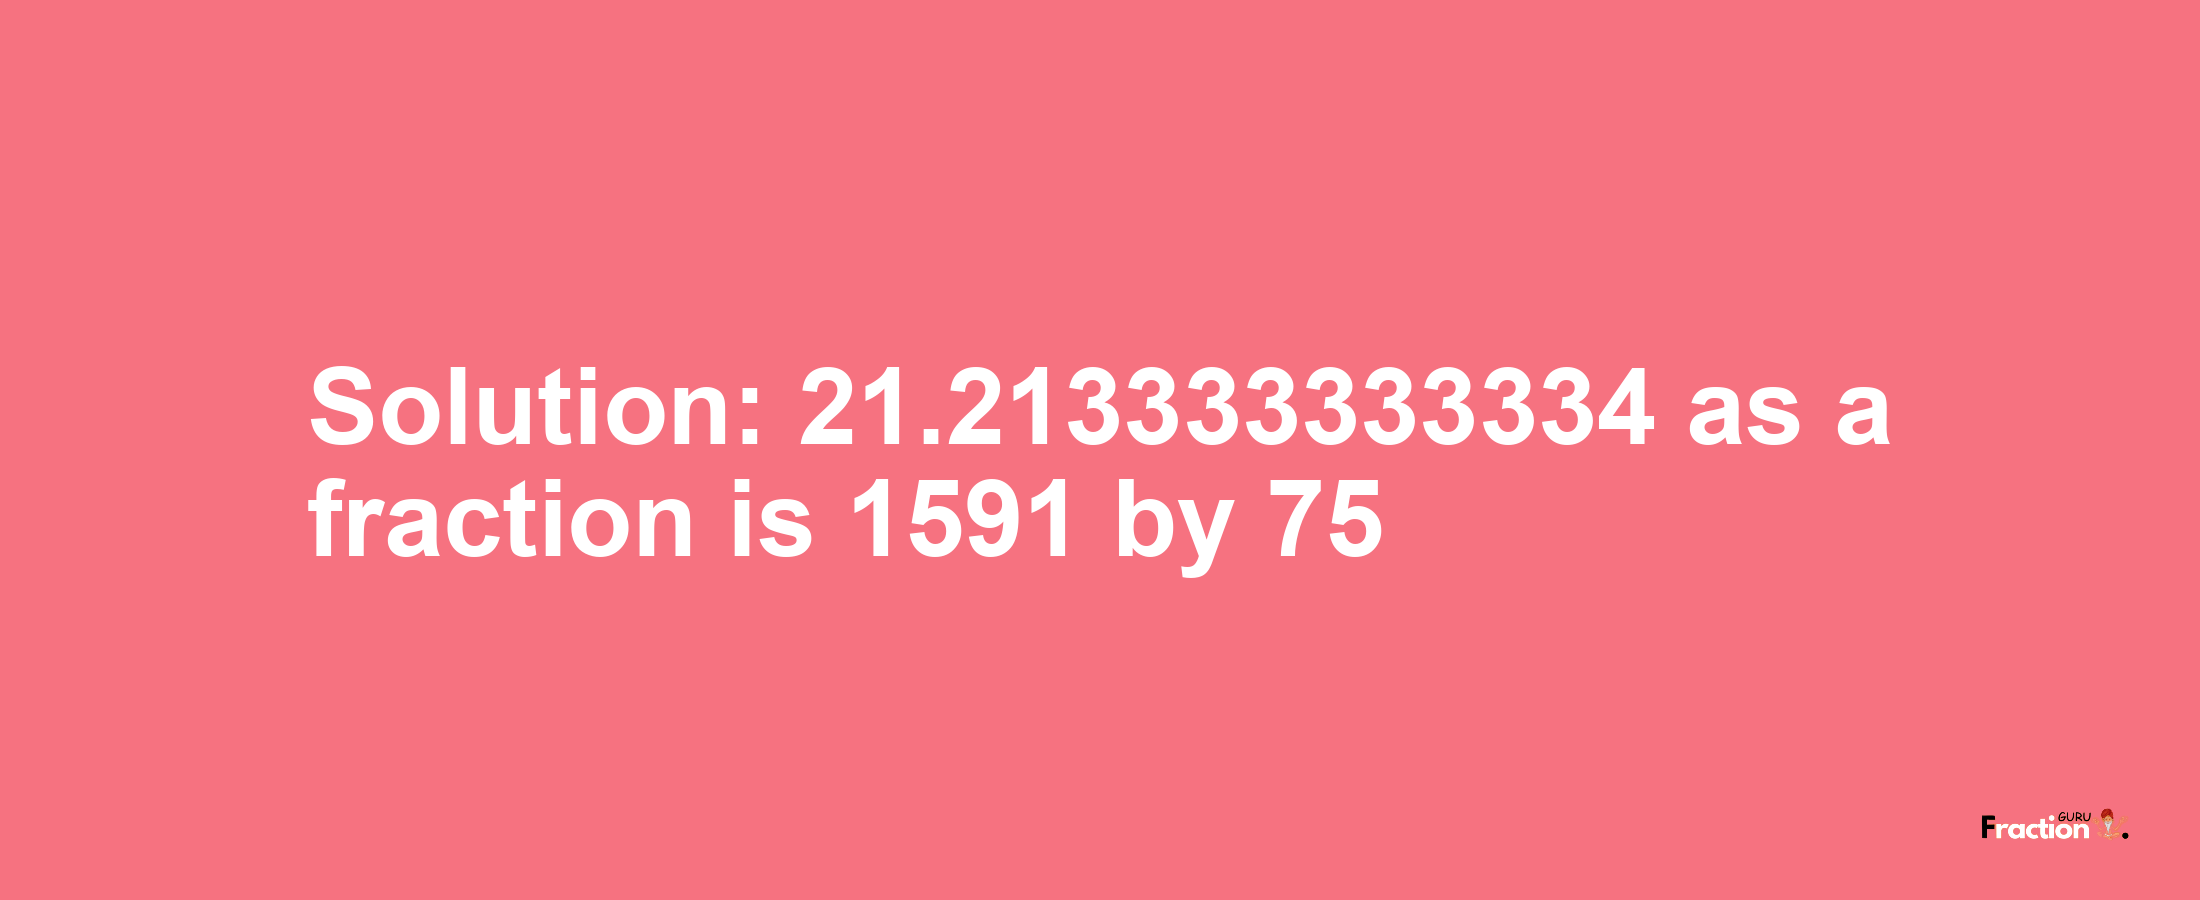 Solution:21.213333333334 as a fraction is 1591/75